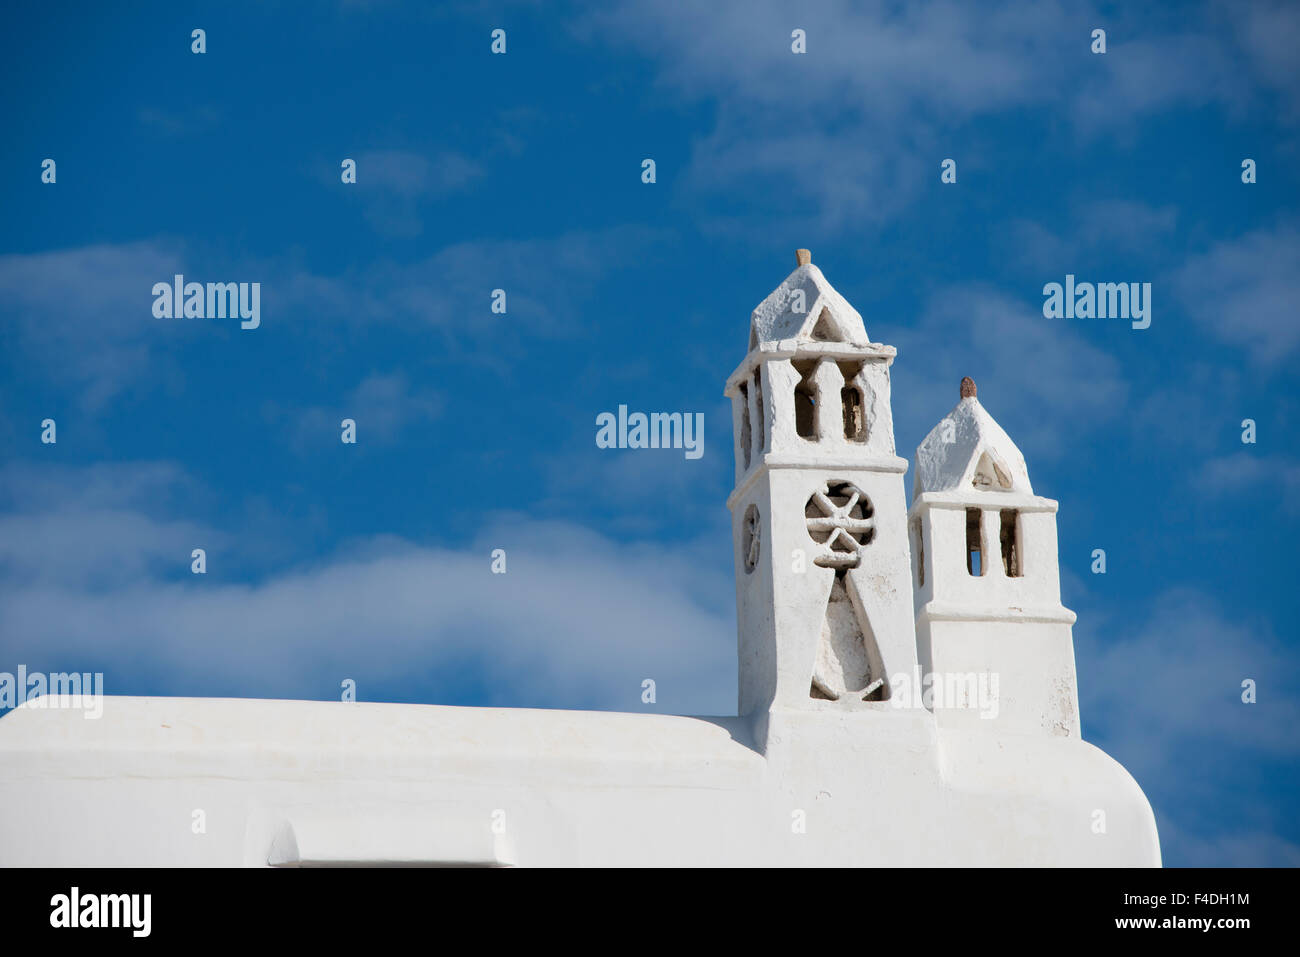 Greece, Cyclades, Mykonos, Hora. Typical whitewashed rooftop showing traditional Cycladic architecture. (Large format sizes available). Stock Photo